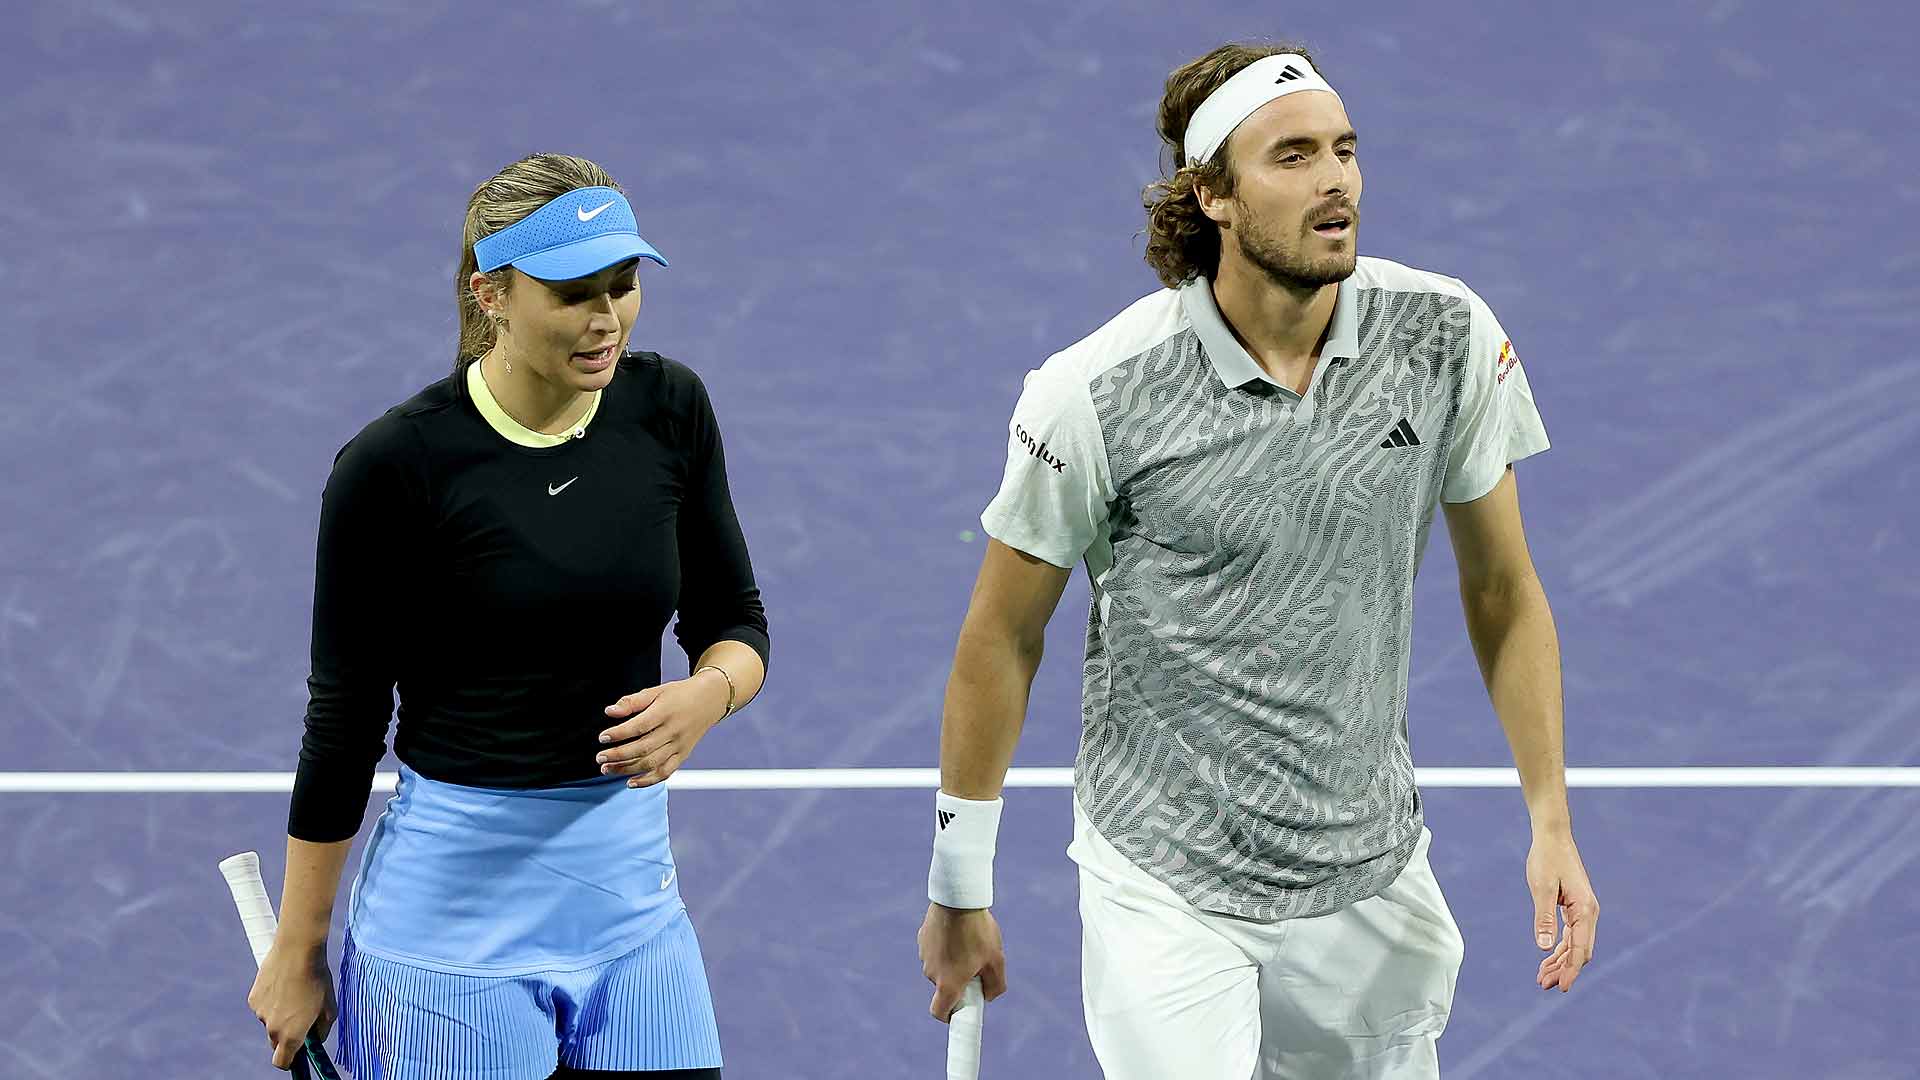 Paula Badosa and Stefanos Tsitsipas in March in Indian Wells.